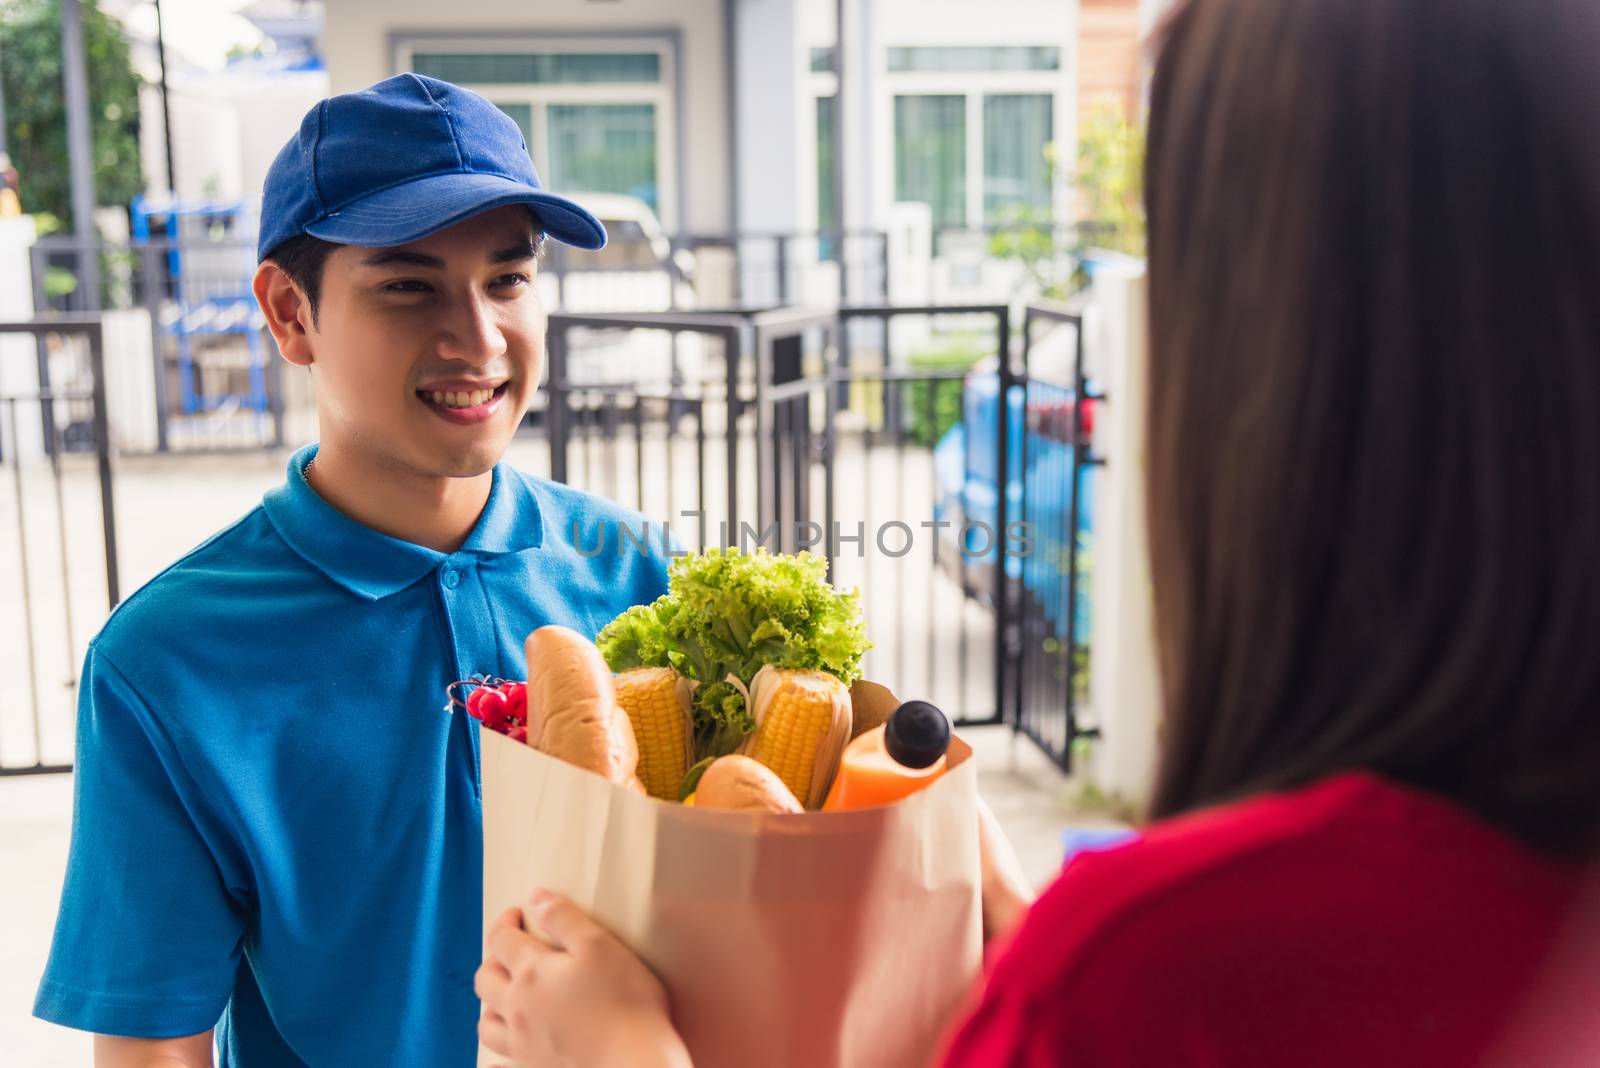 Asian young delivery man in uniform making grocery fast service giving fresh food in paper bag to woman customer receiving at house door under pandemic coronavirus, Back to new normal concept